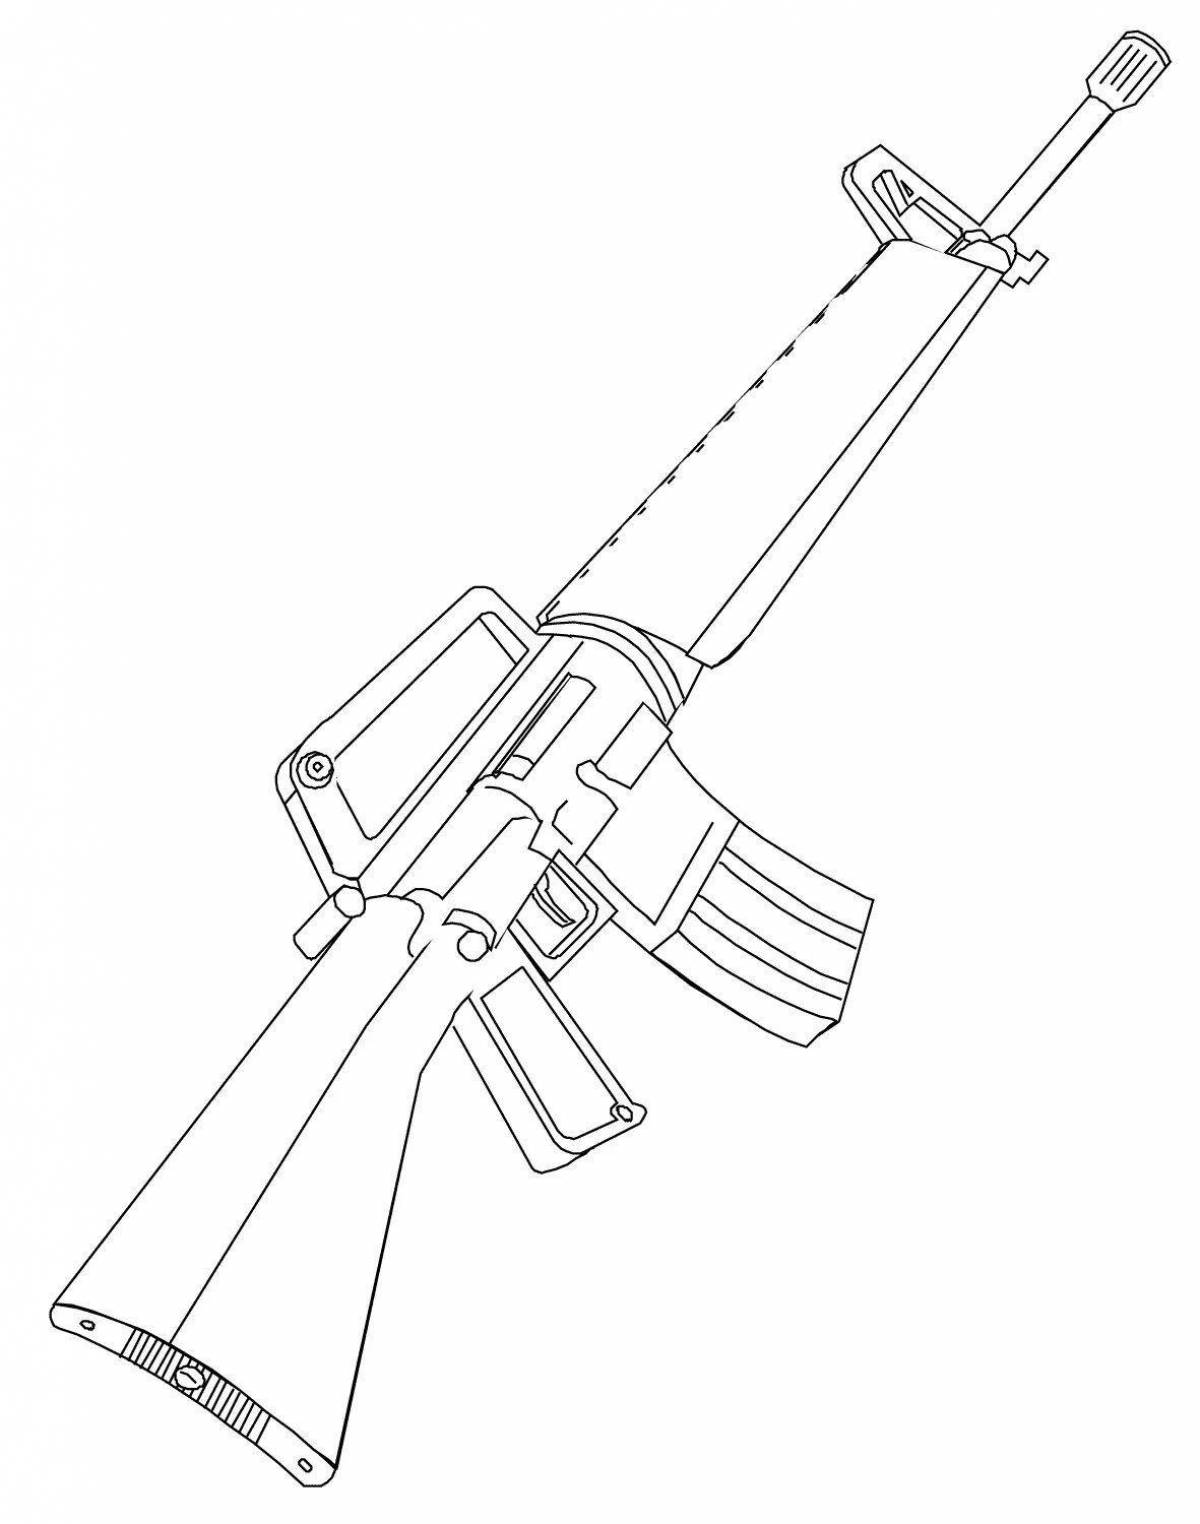 Outstanding coloring pages with guns for boys